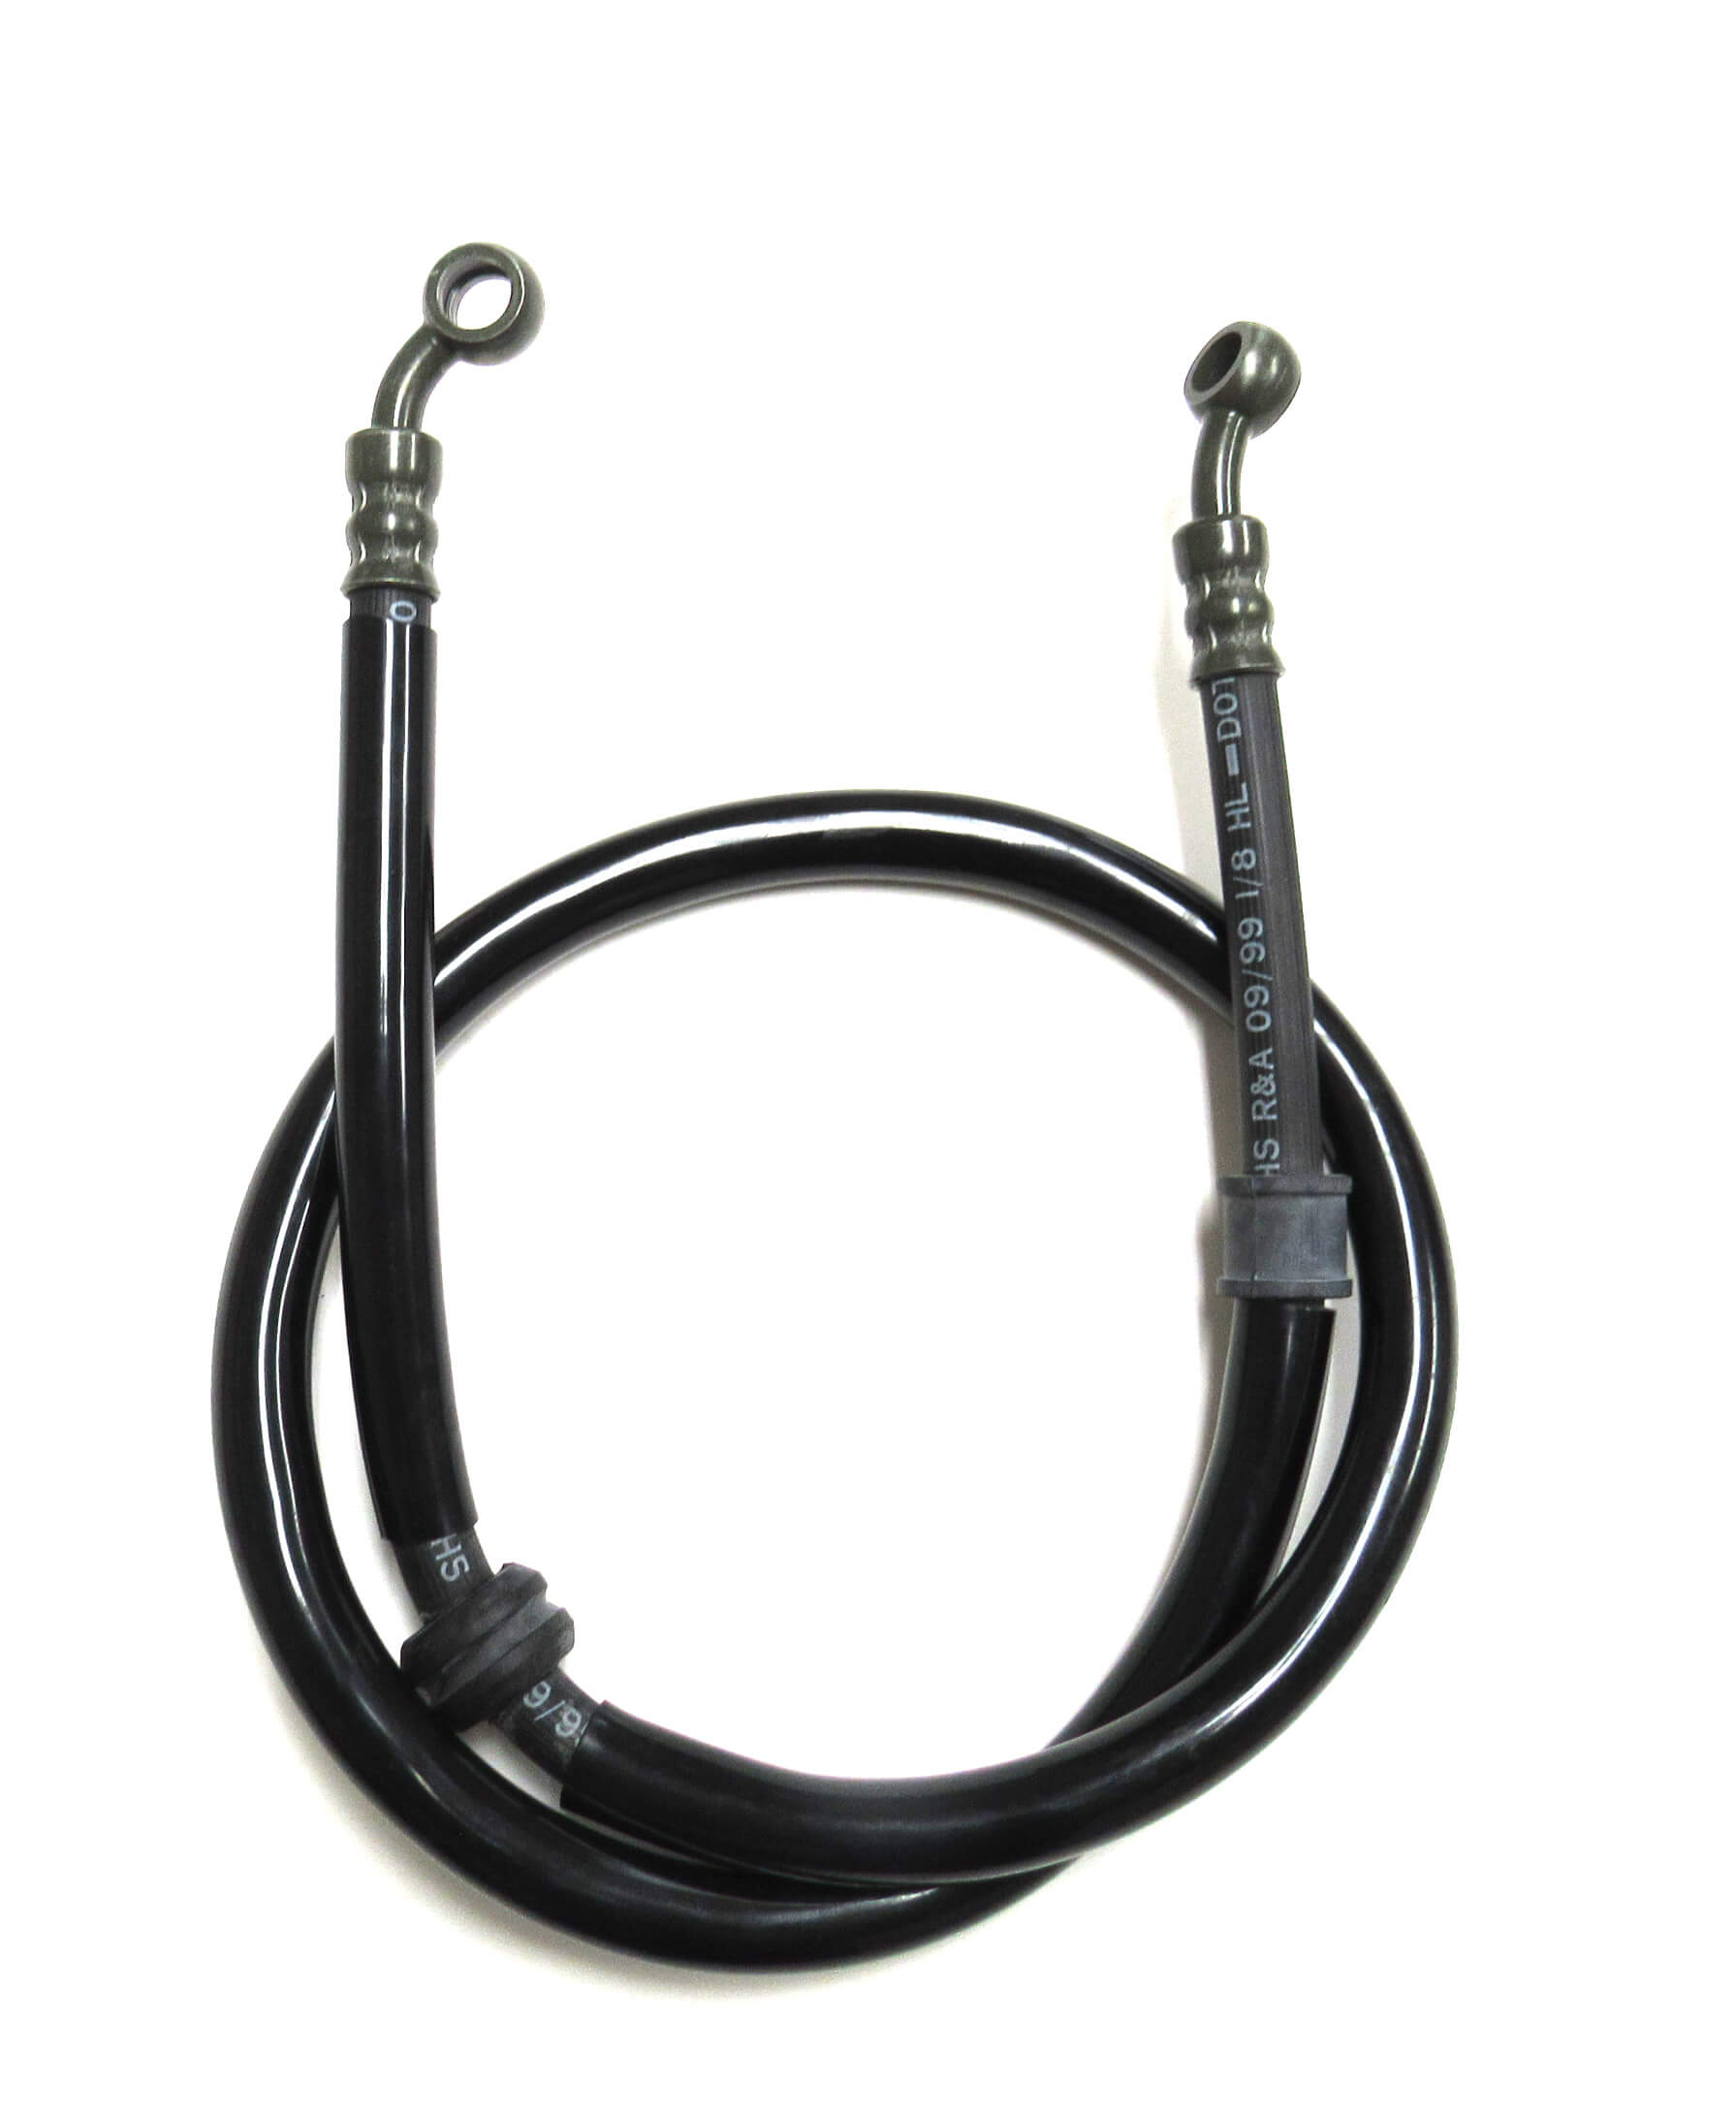 Hydraulic Brake Line L=38" Fits E-Ton Scooters + other brands as well as many Go Karts